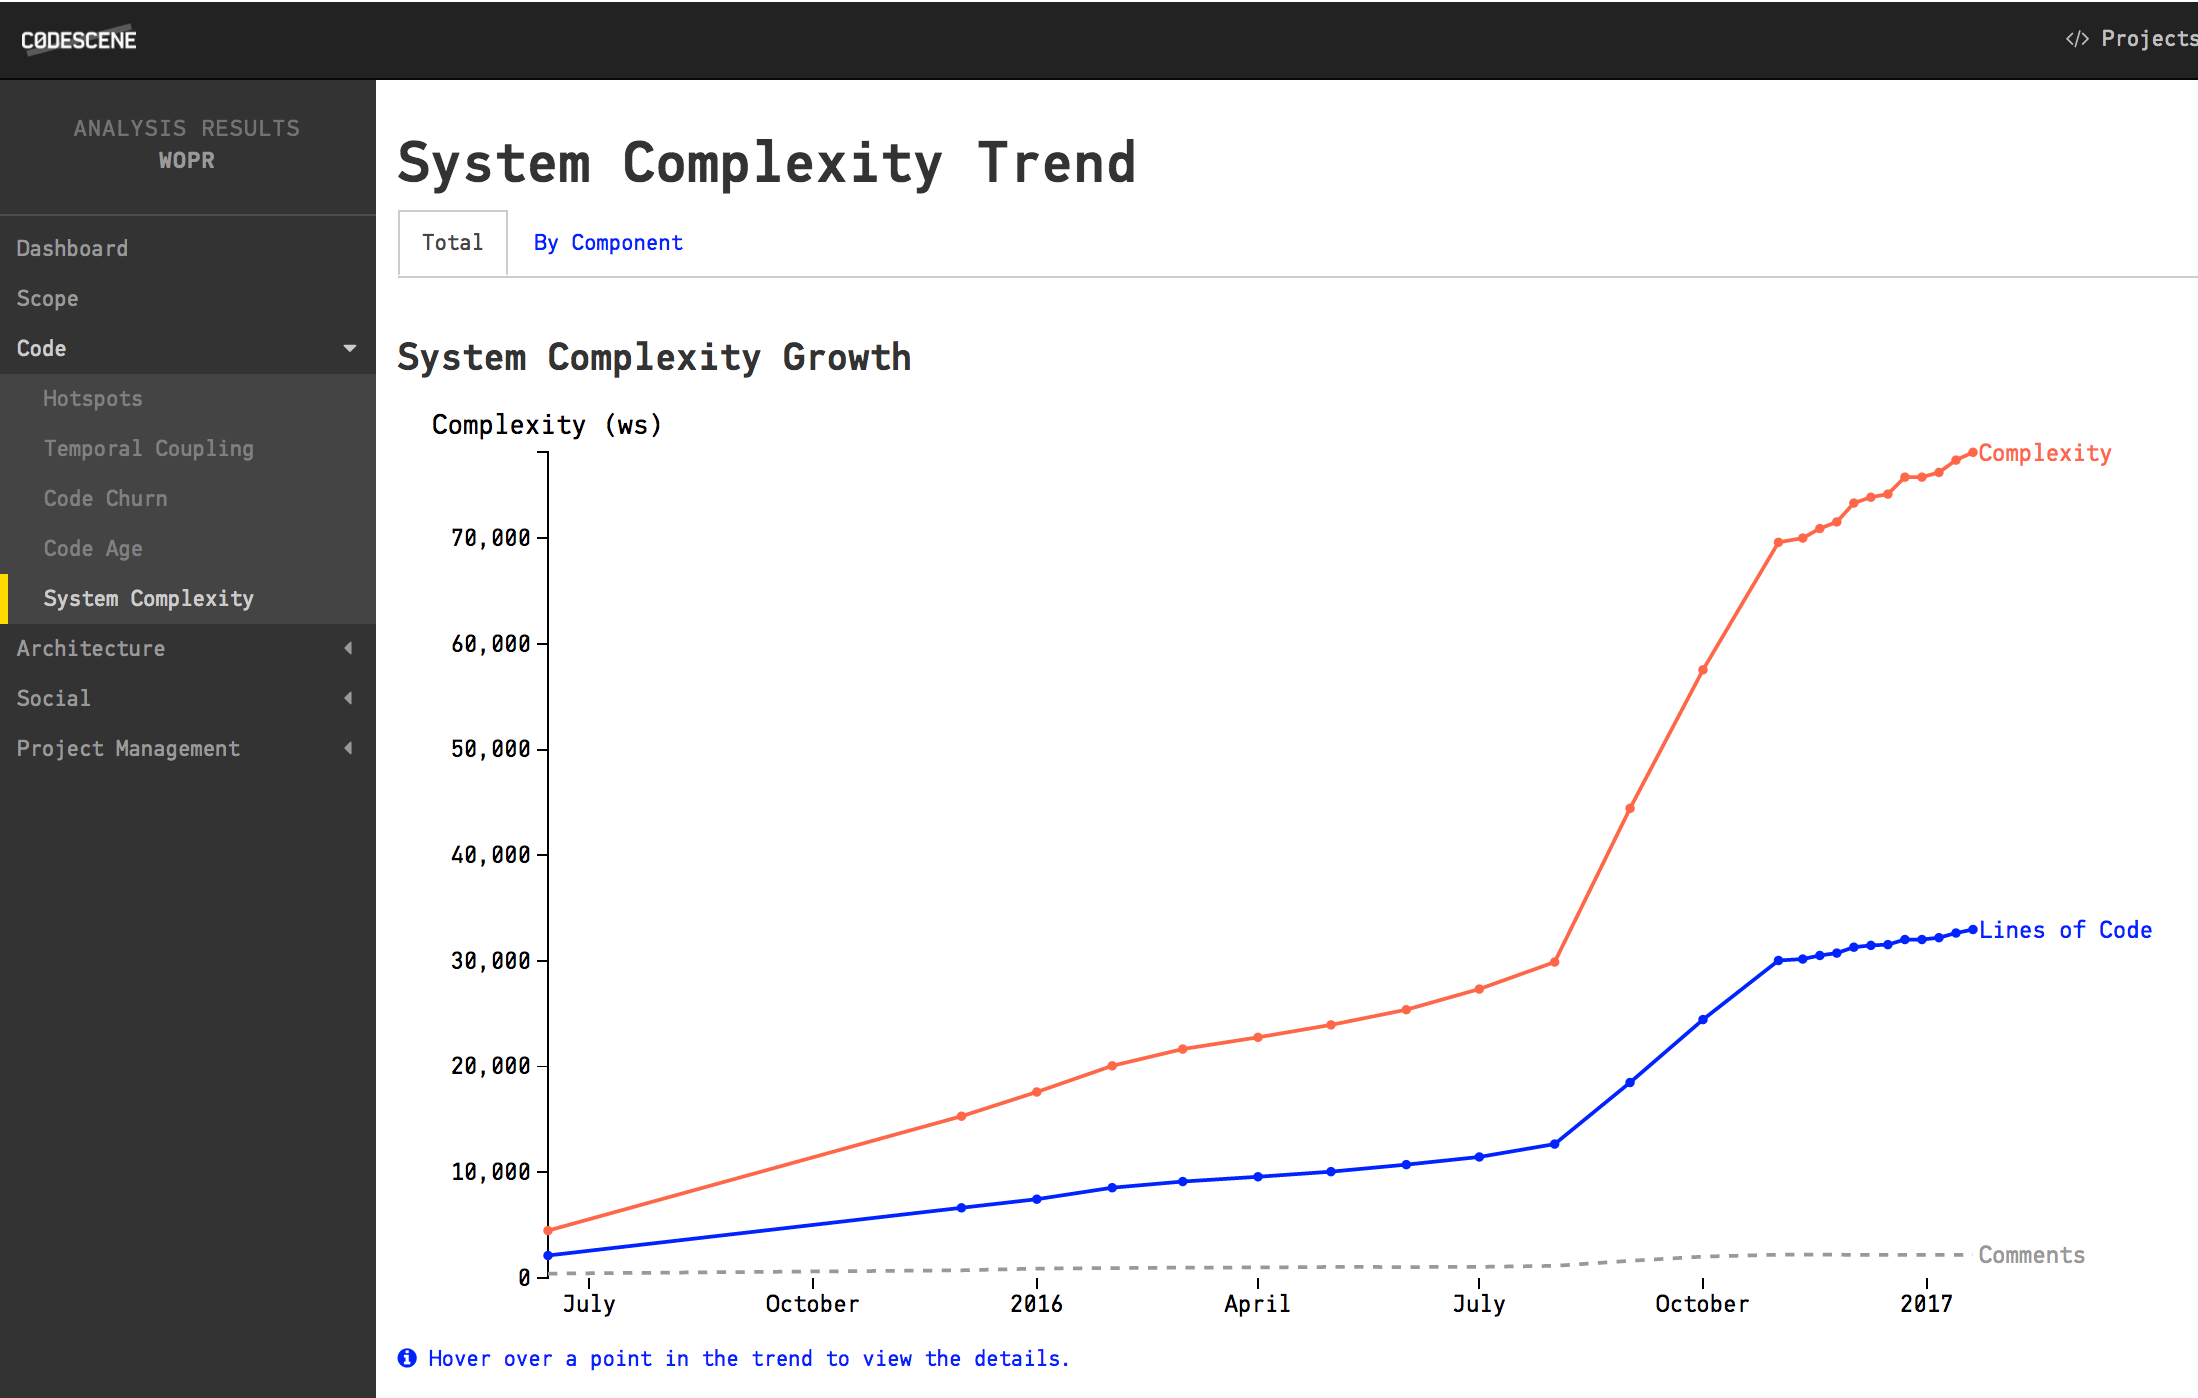 SystemComplexityTrend